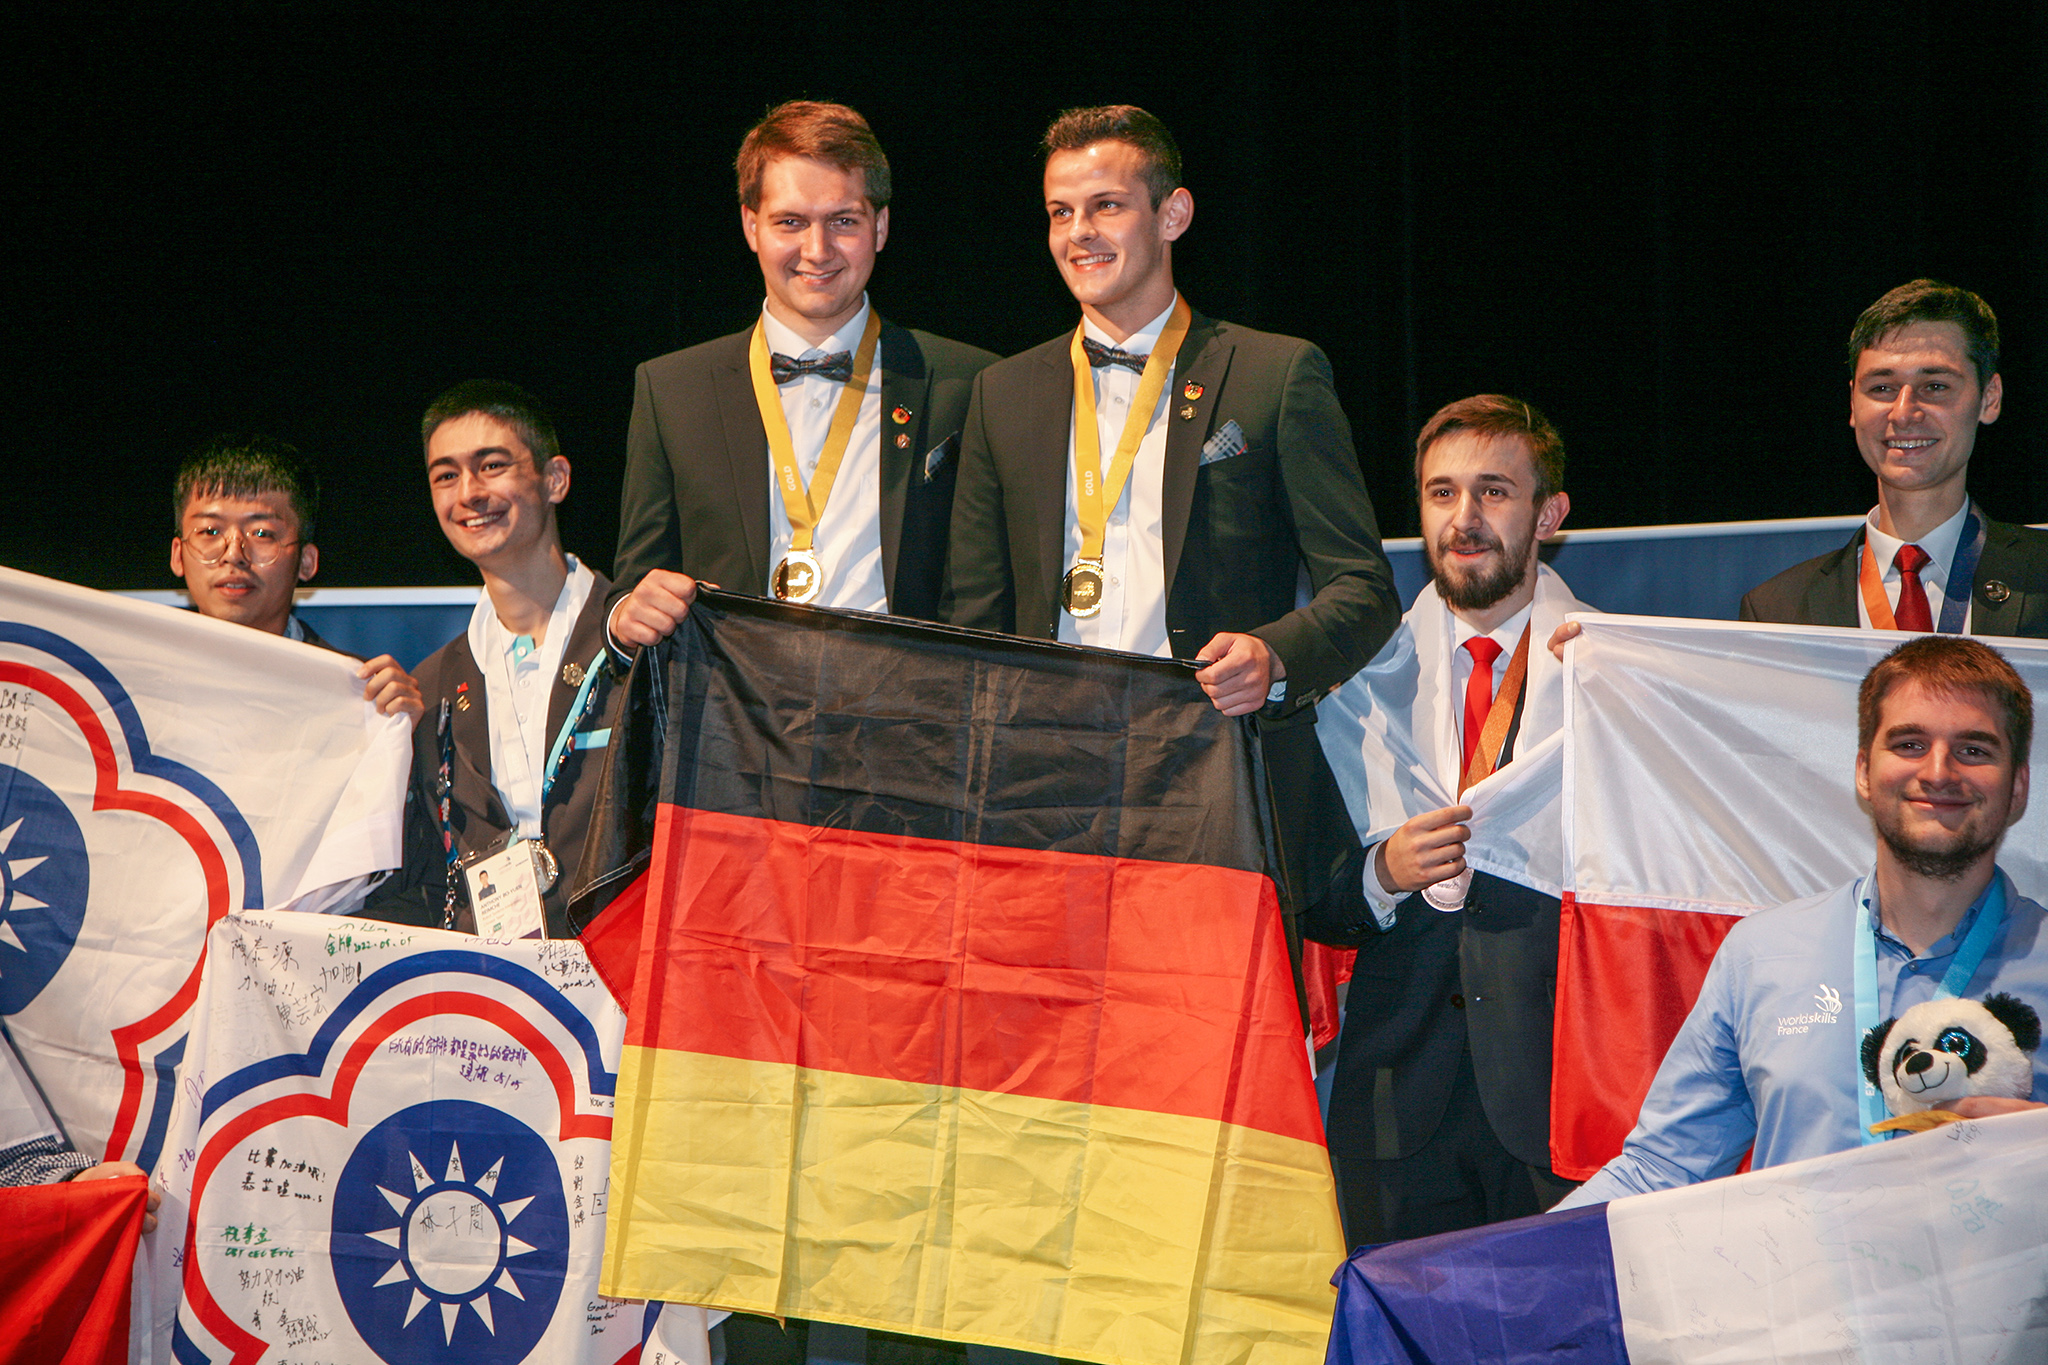 Philipp Raab and Marvin Schuster with their gold medals at the award ceremony